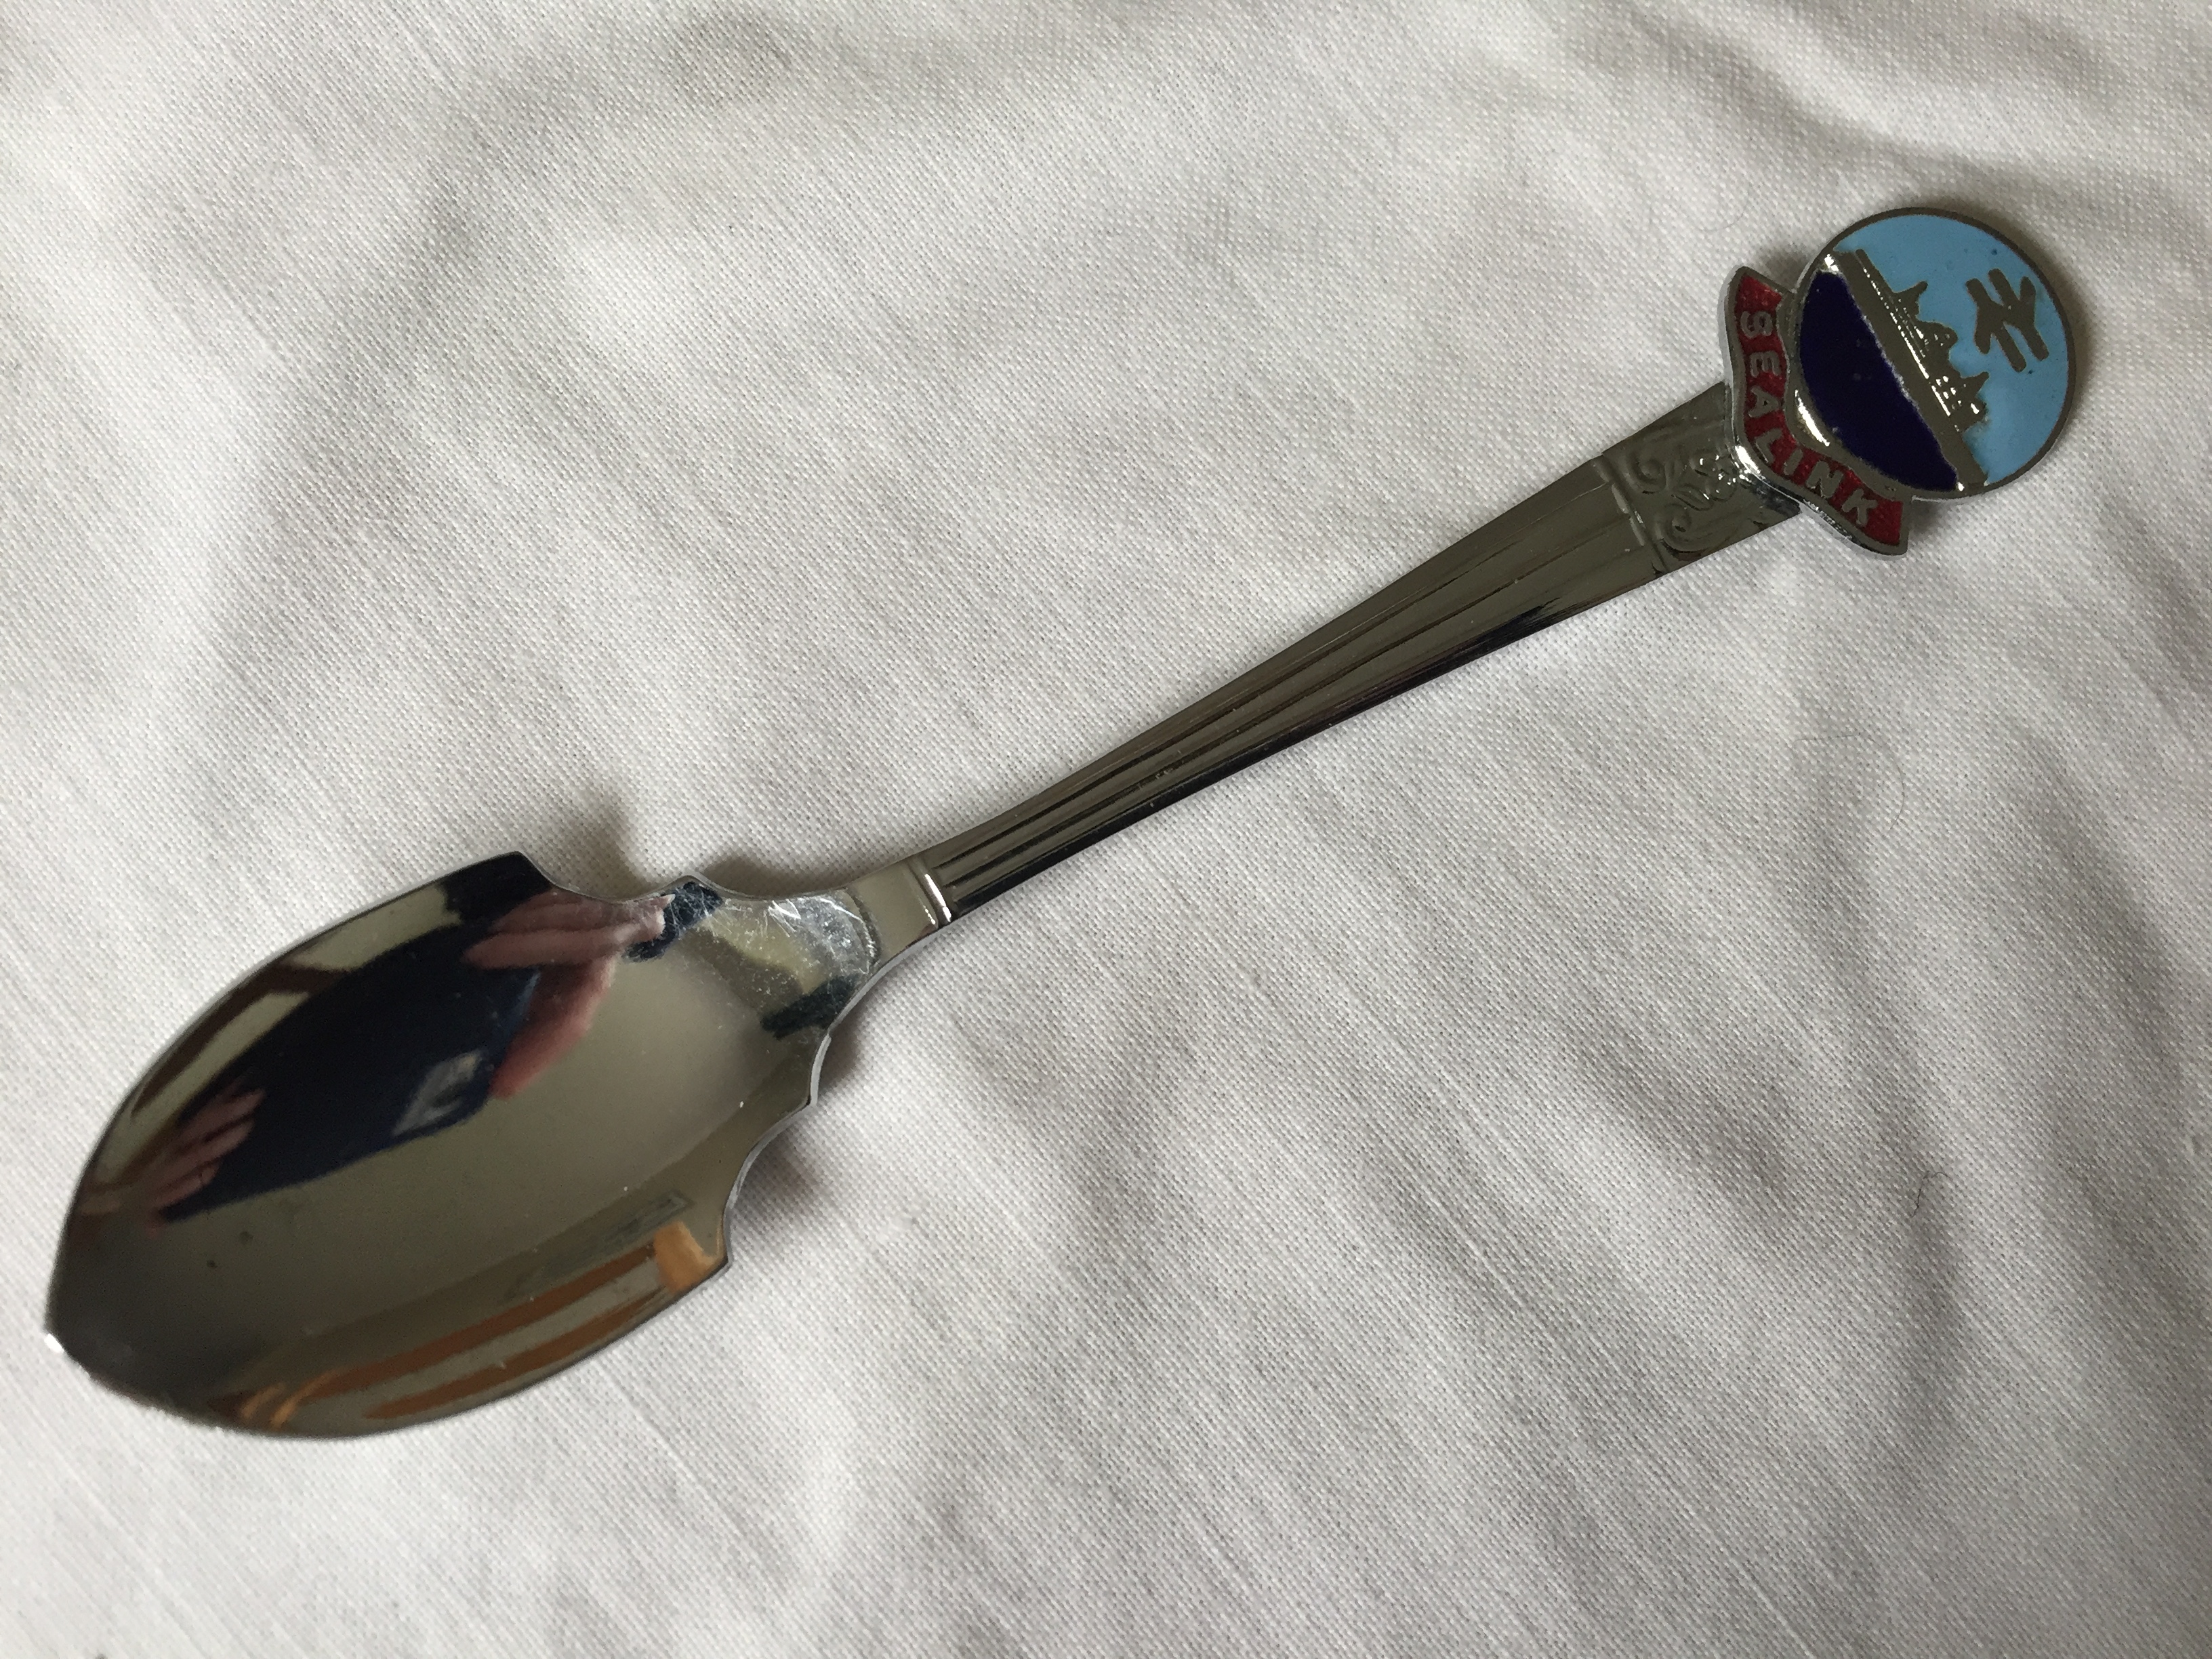 SOUVENIR SPOON FROM THE SEALINK FERRY CROSSING COMPANY